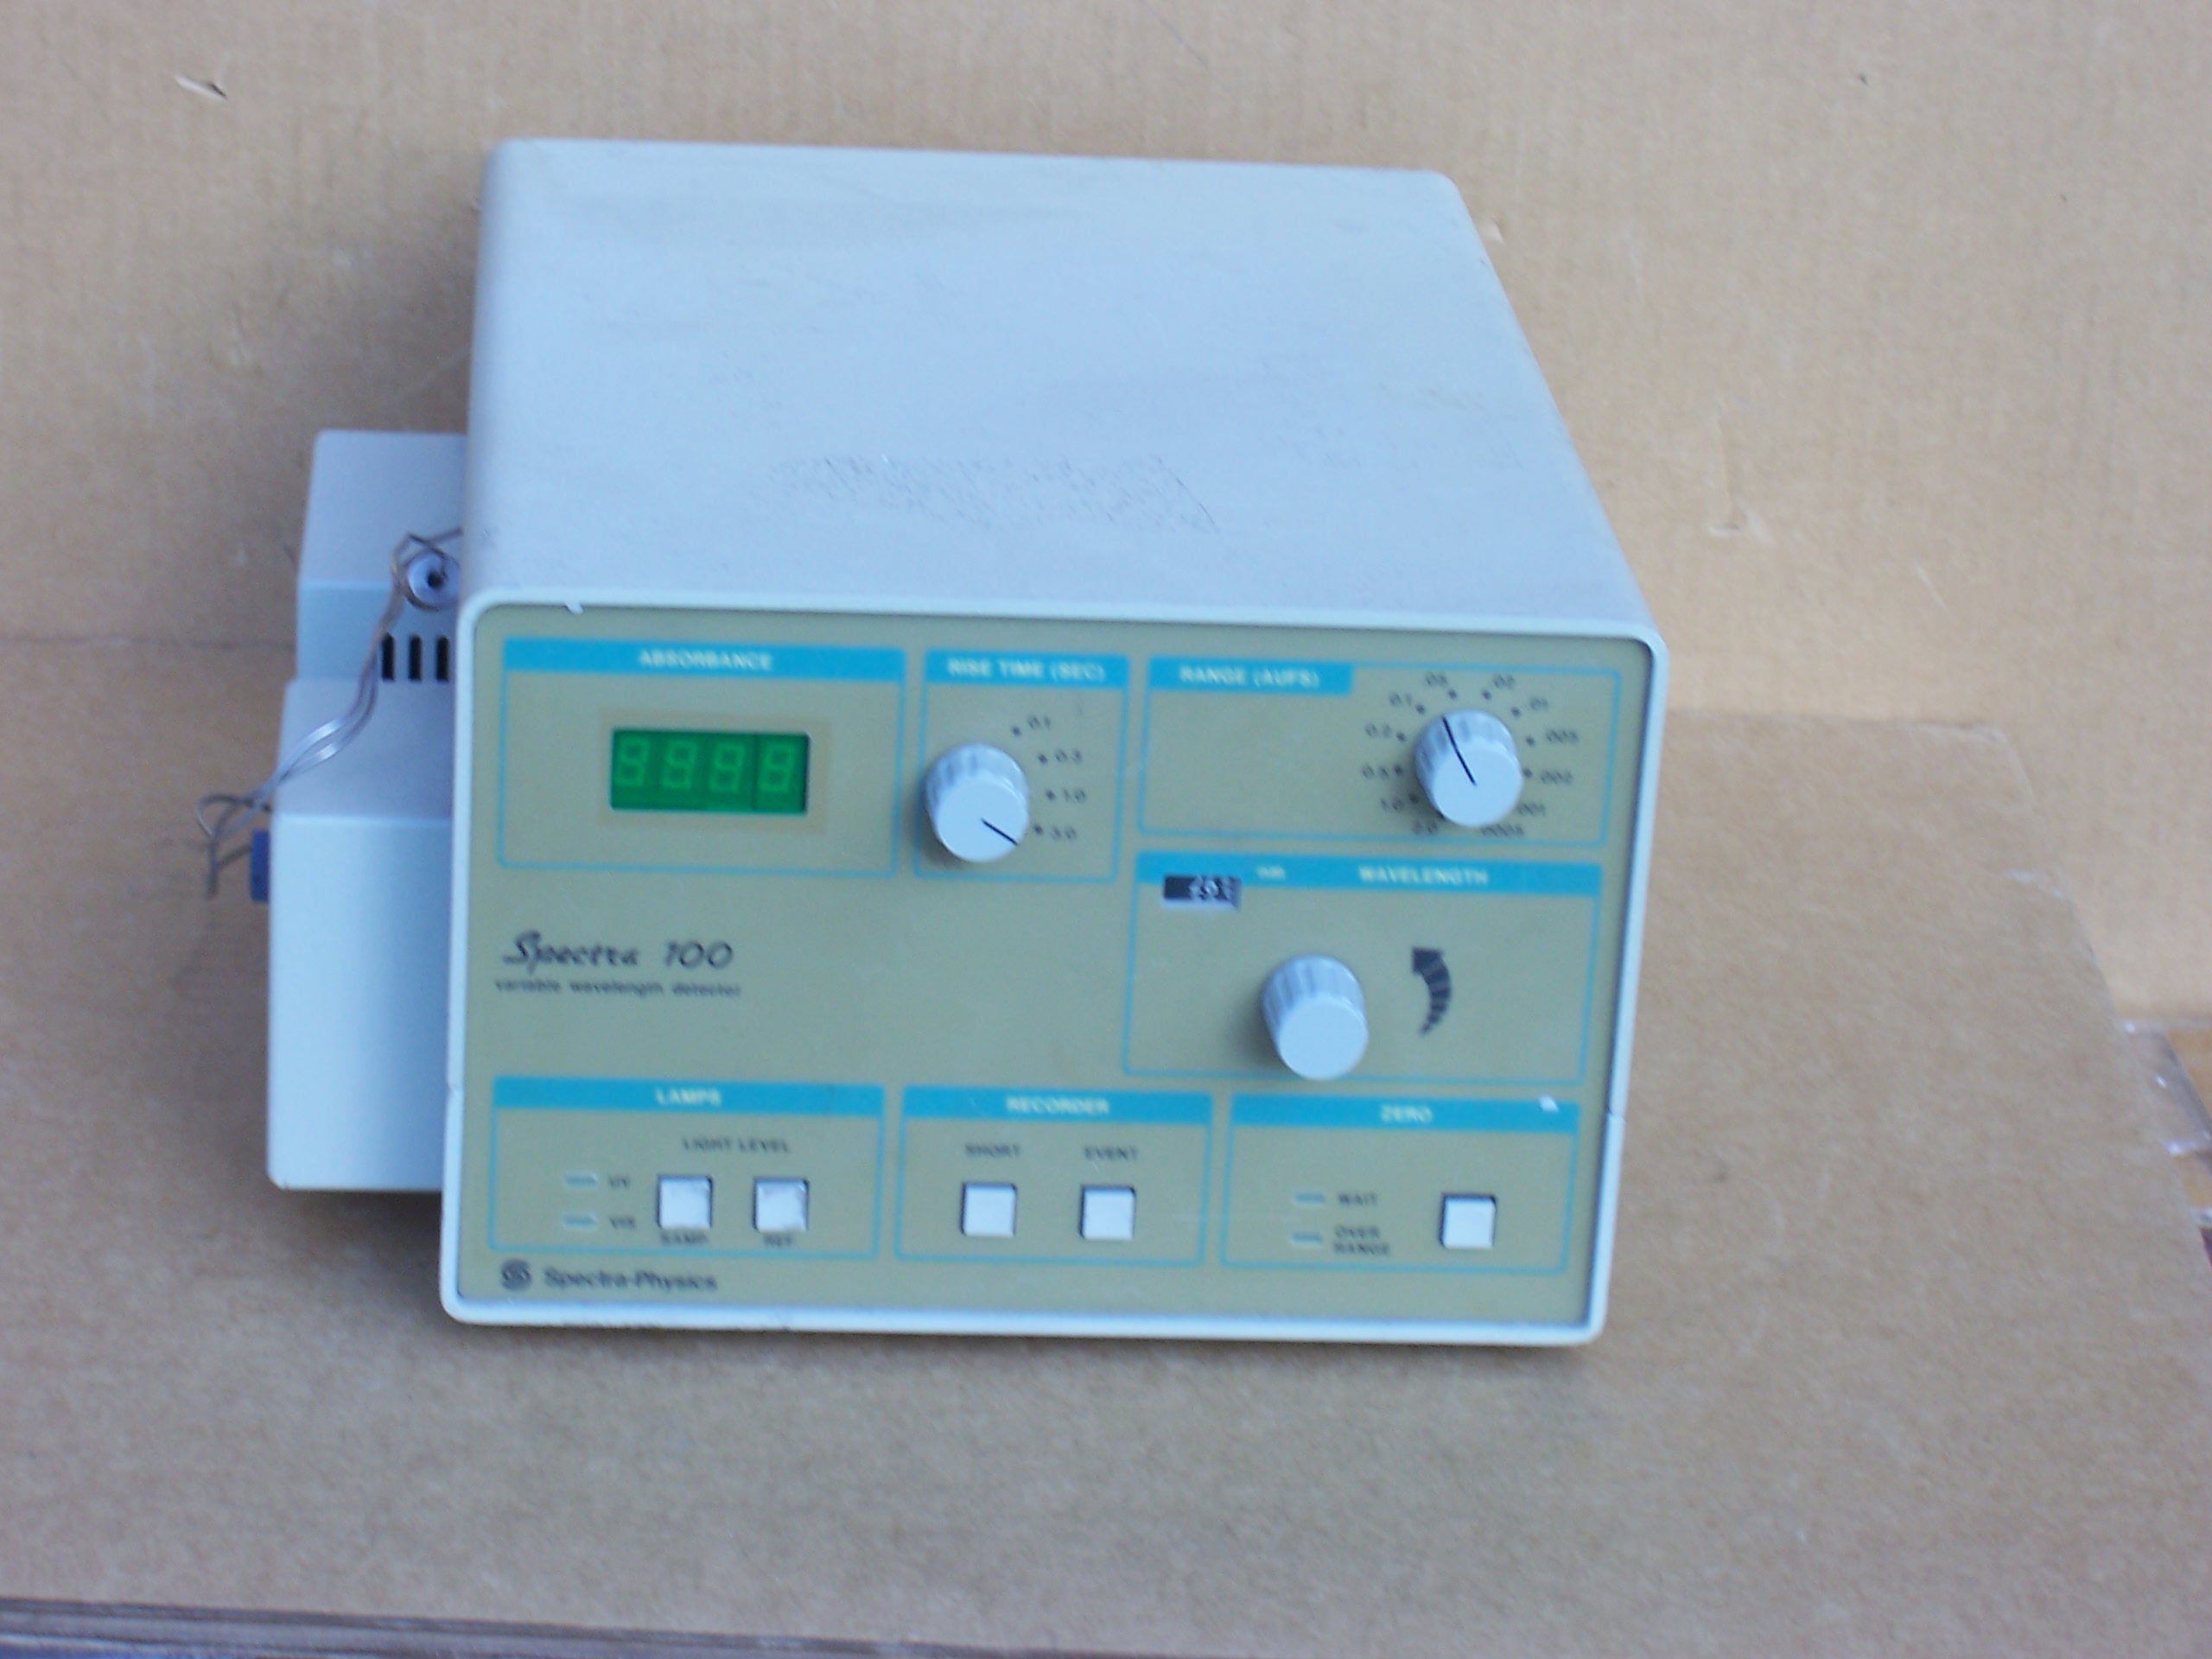 Spectra-Physics Spectra 100 Variable Wavelength Detector 